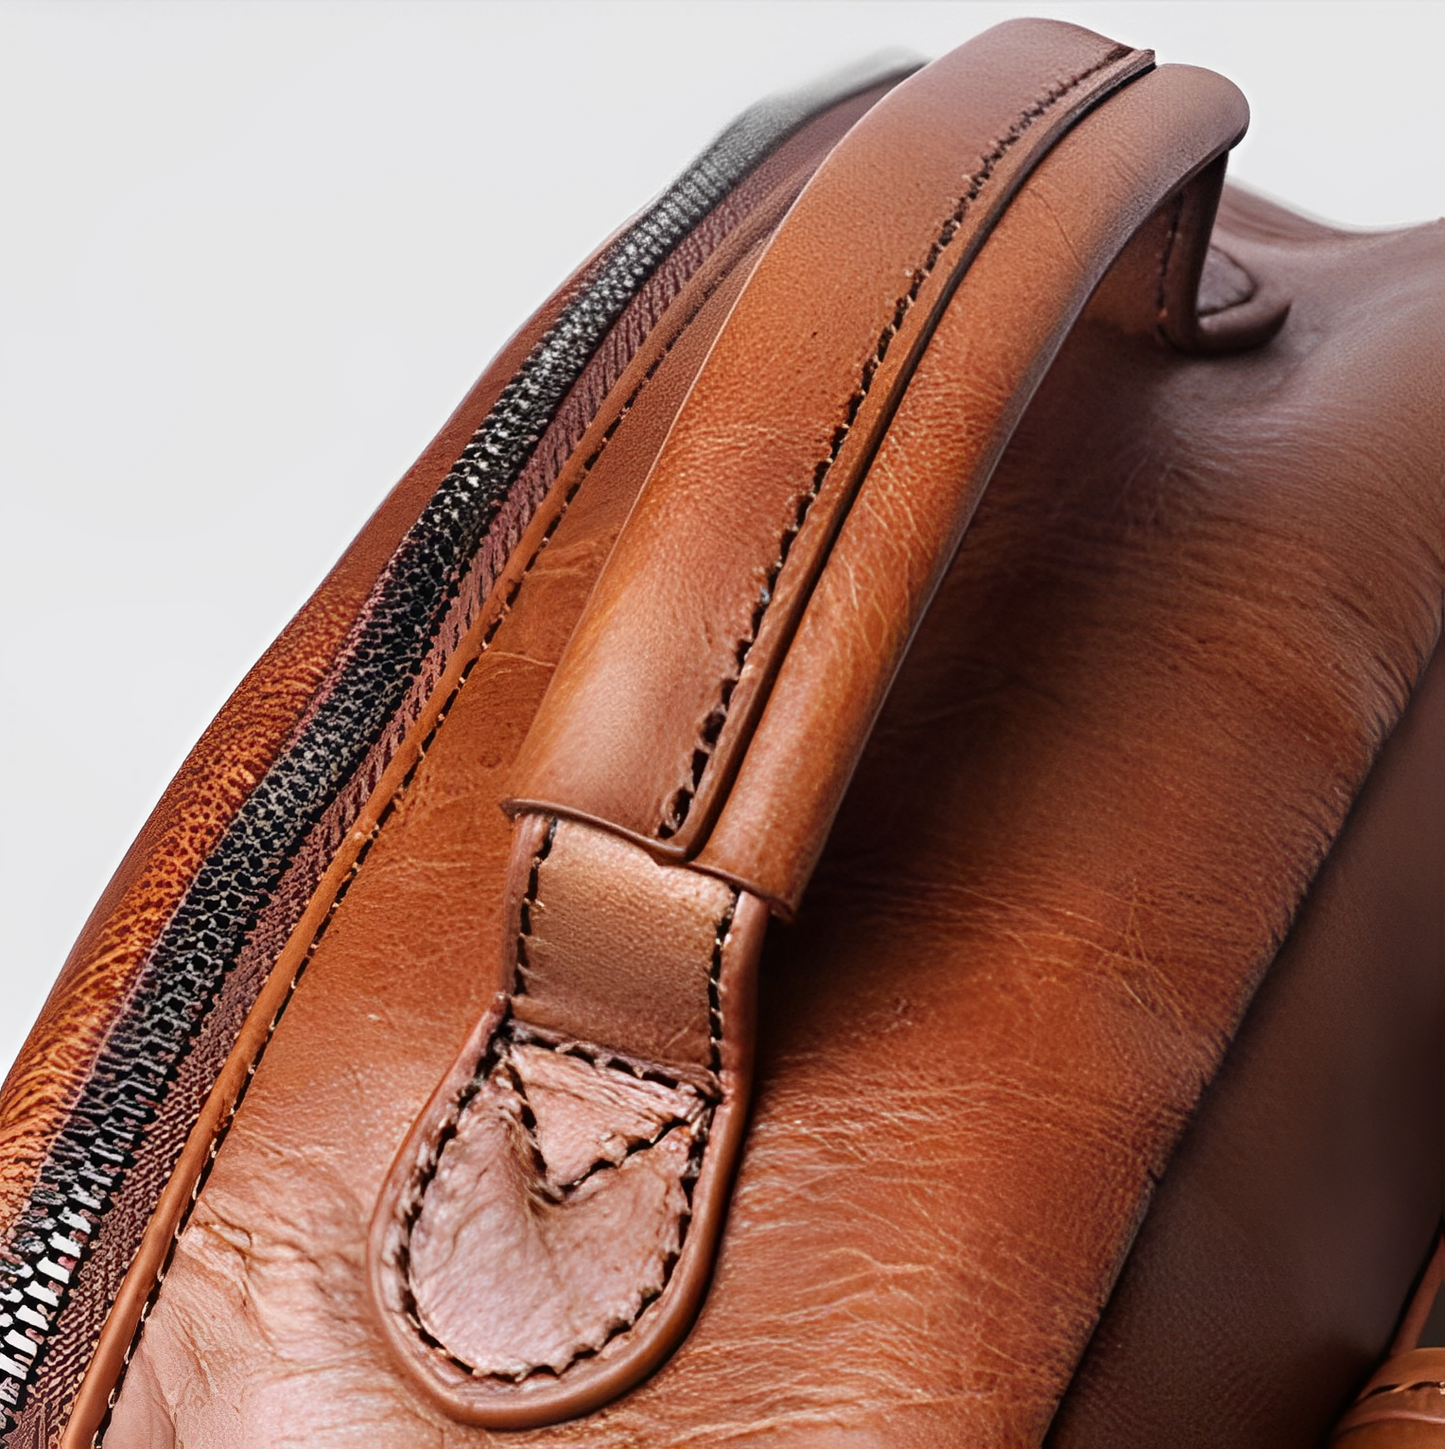 Bazgy Espresso: A Genuine Leather Backpack - BagzyBag